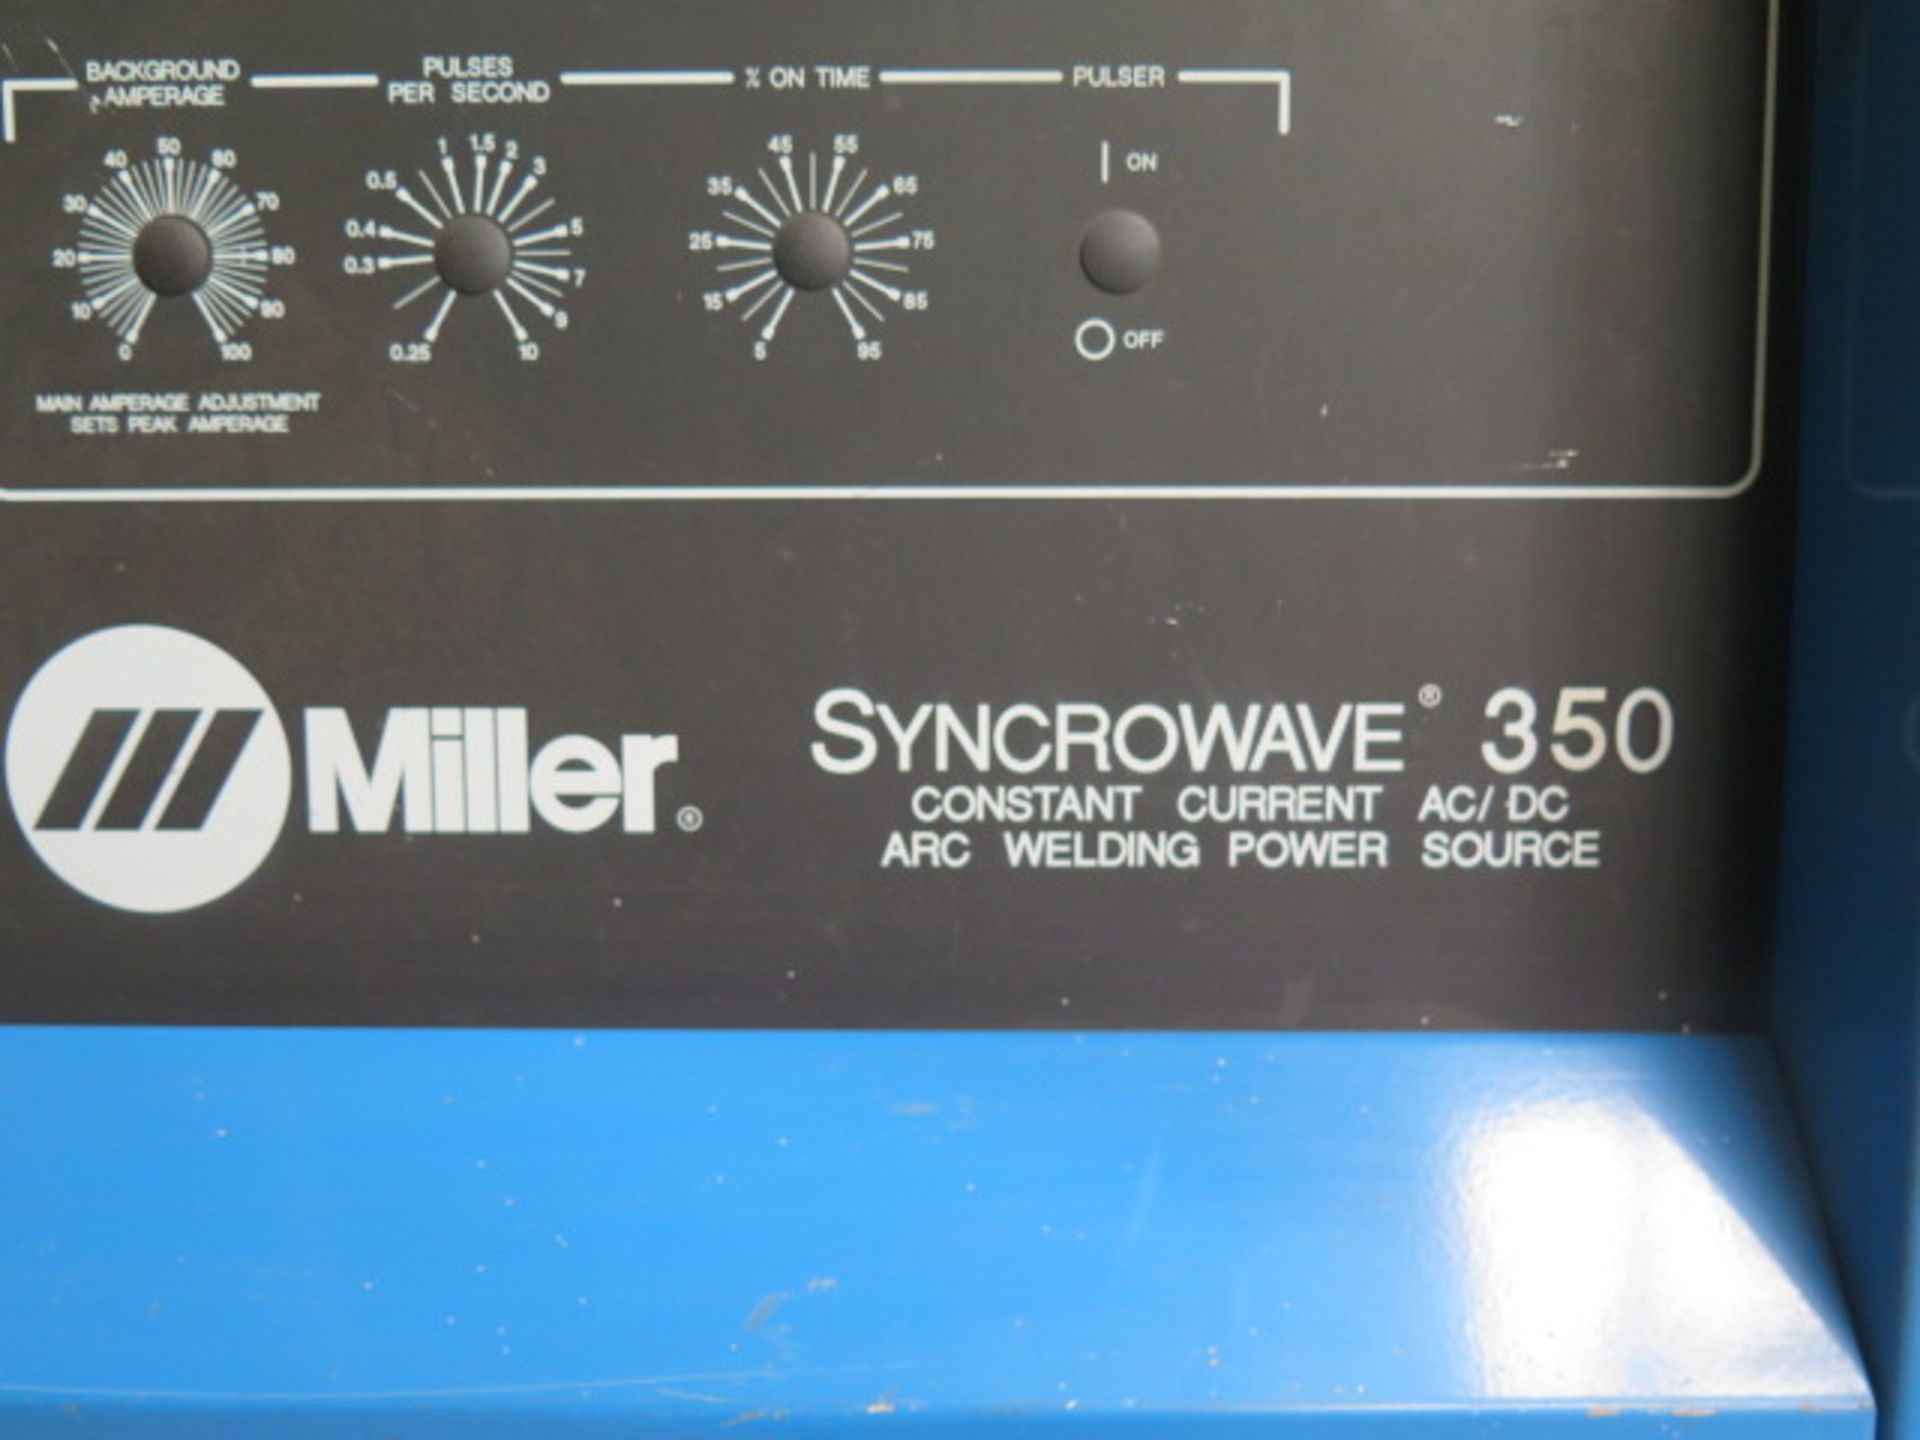 Miller Syncrowave 350 CC-AC/DC Arc Welding Power Source s/n KB067130 w/ Miller Coolmate 1A Cooling - Image 7 of 7